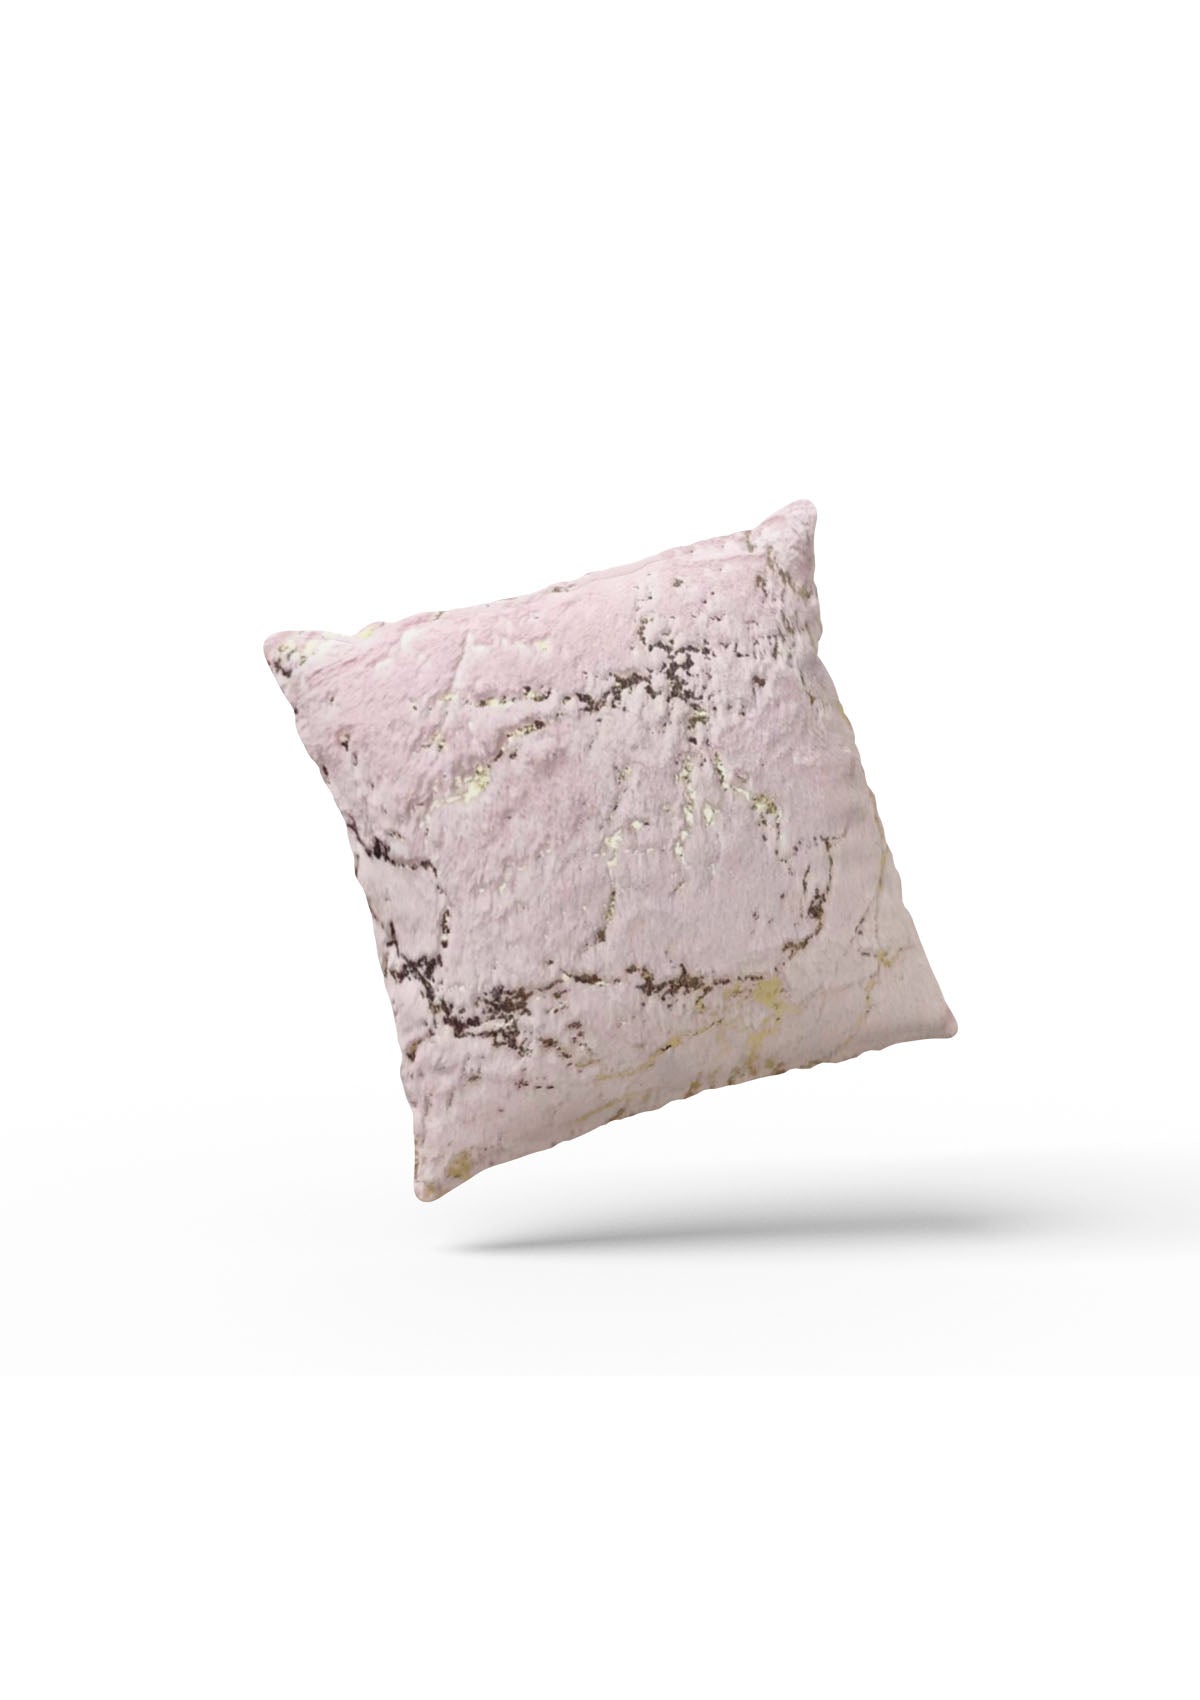 Elegant rose gold cushion cover with soft texture